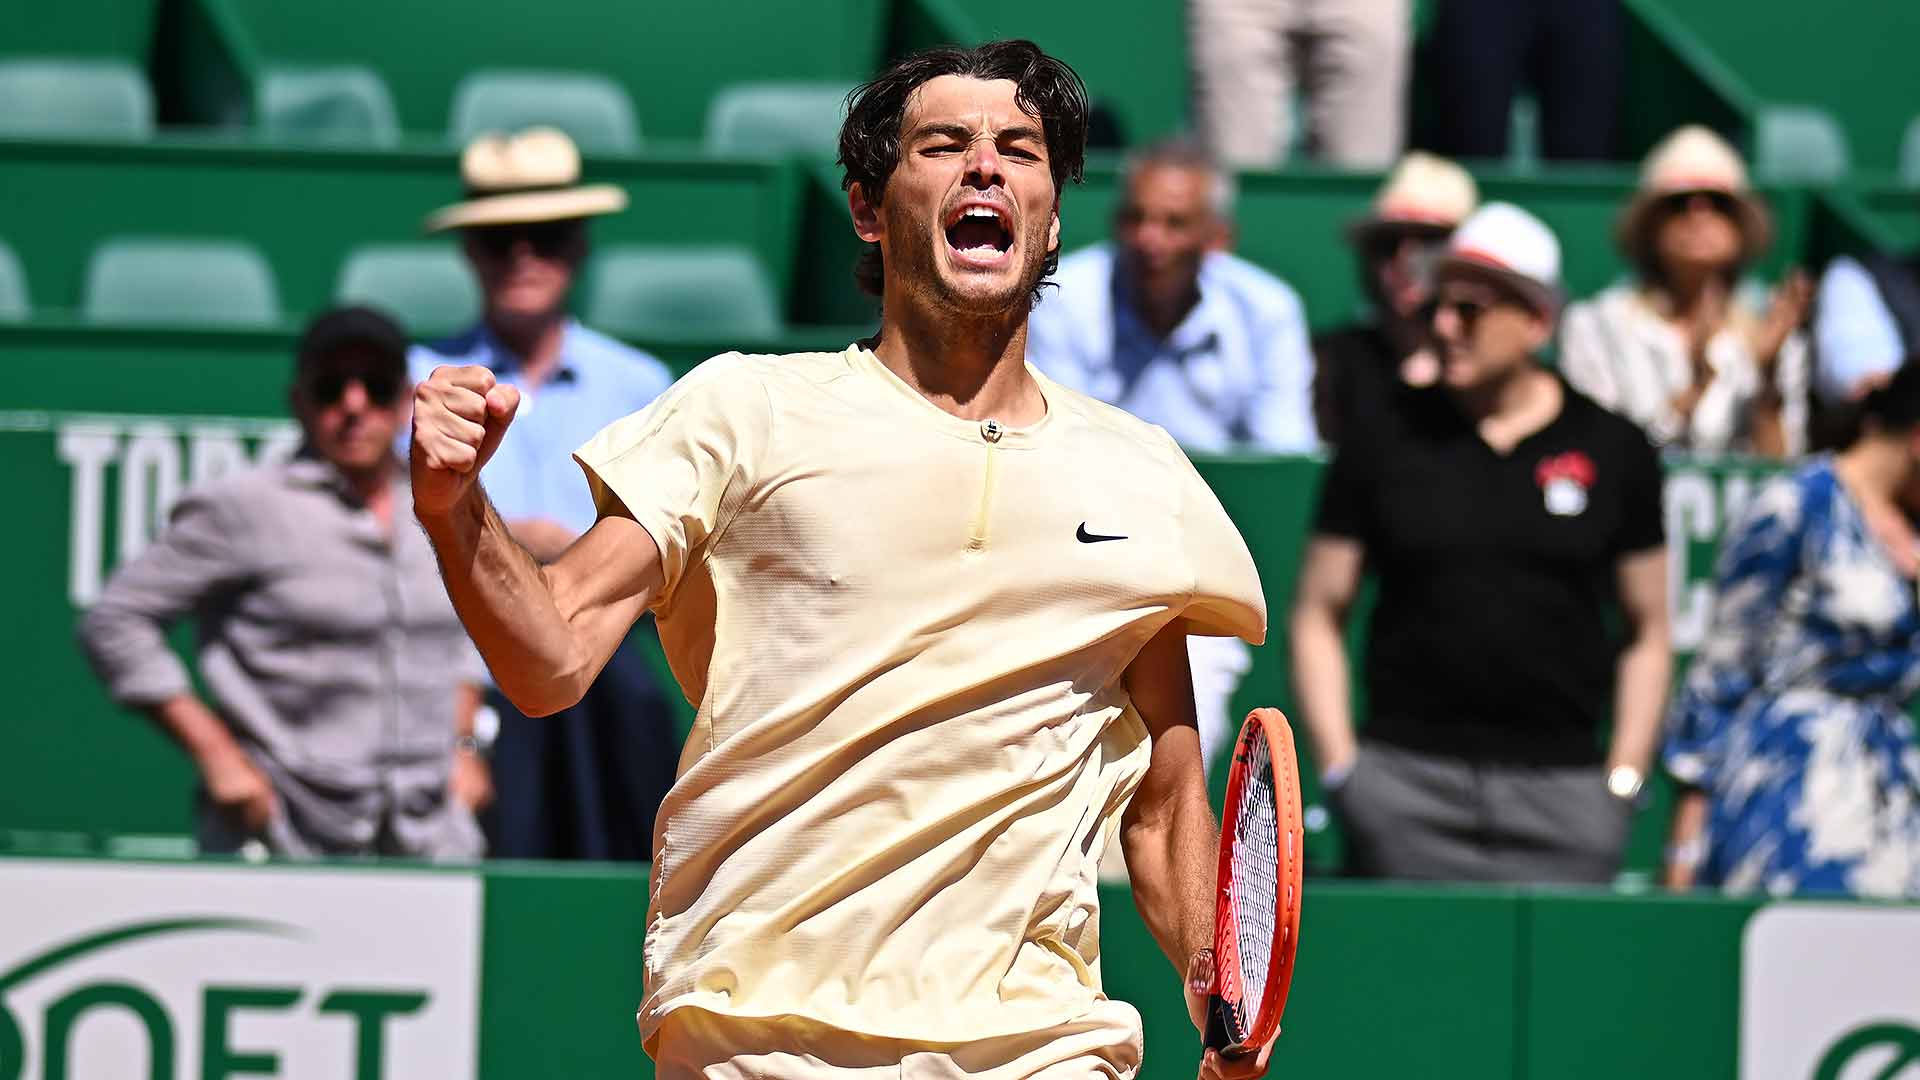 Taylor Fritz is No. 9 in the Pepperstone ATP Rankings.